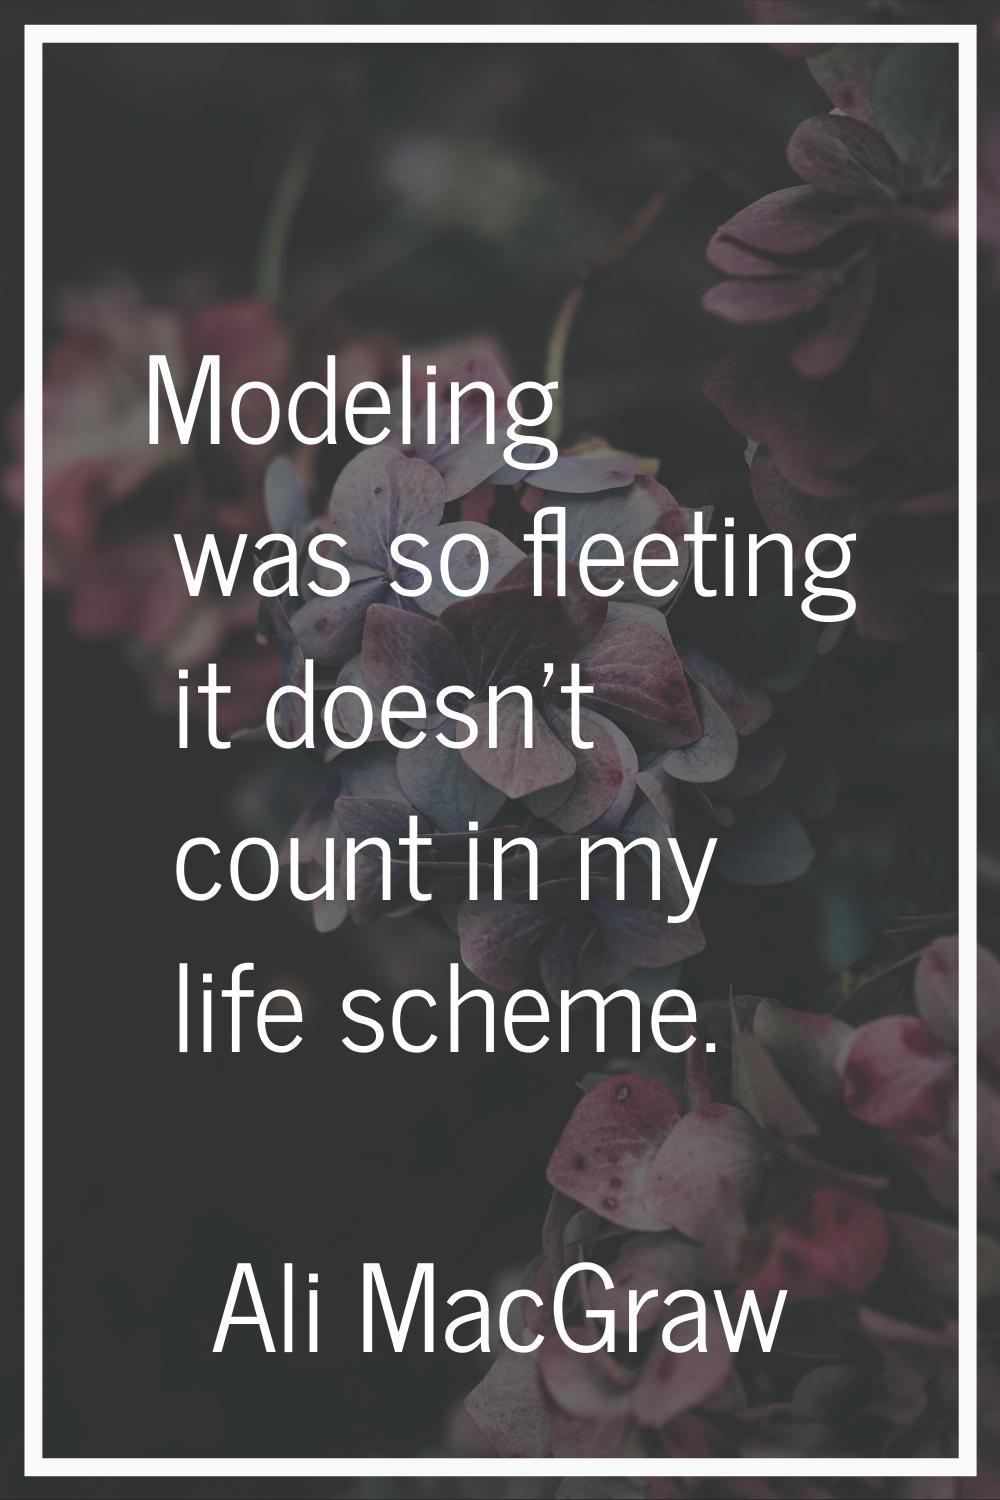 Modeling was so fleeting it doesn't count in my life scheme.